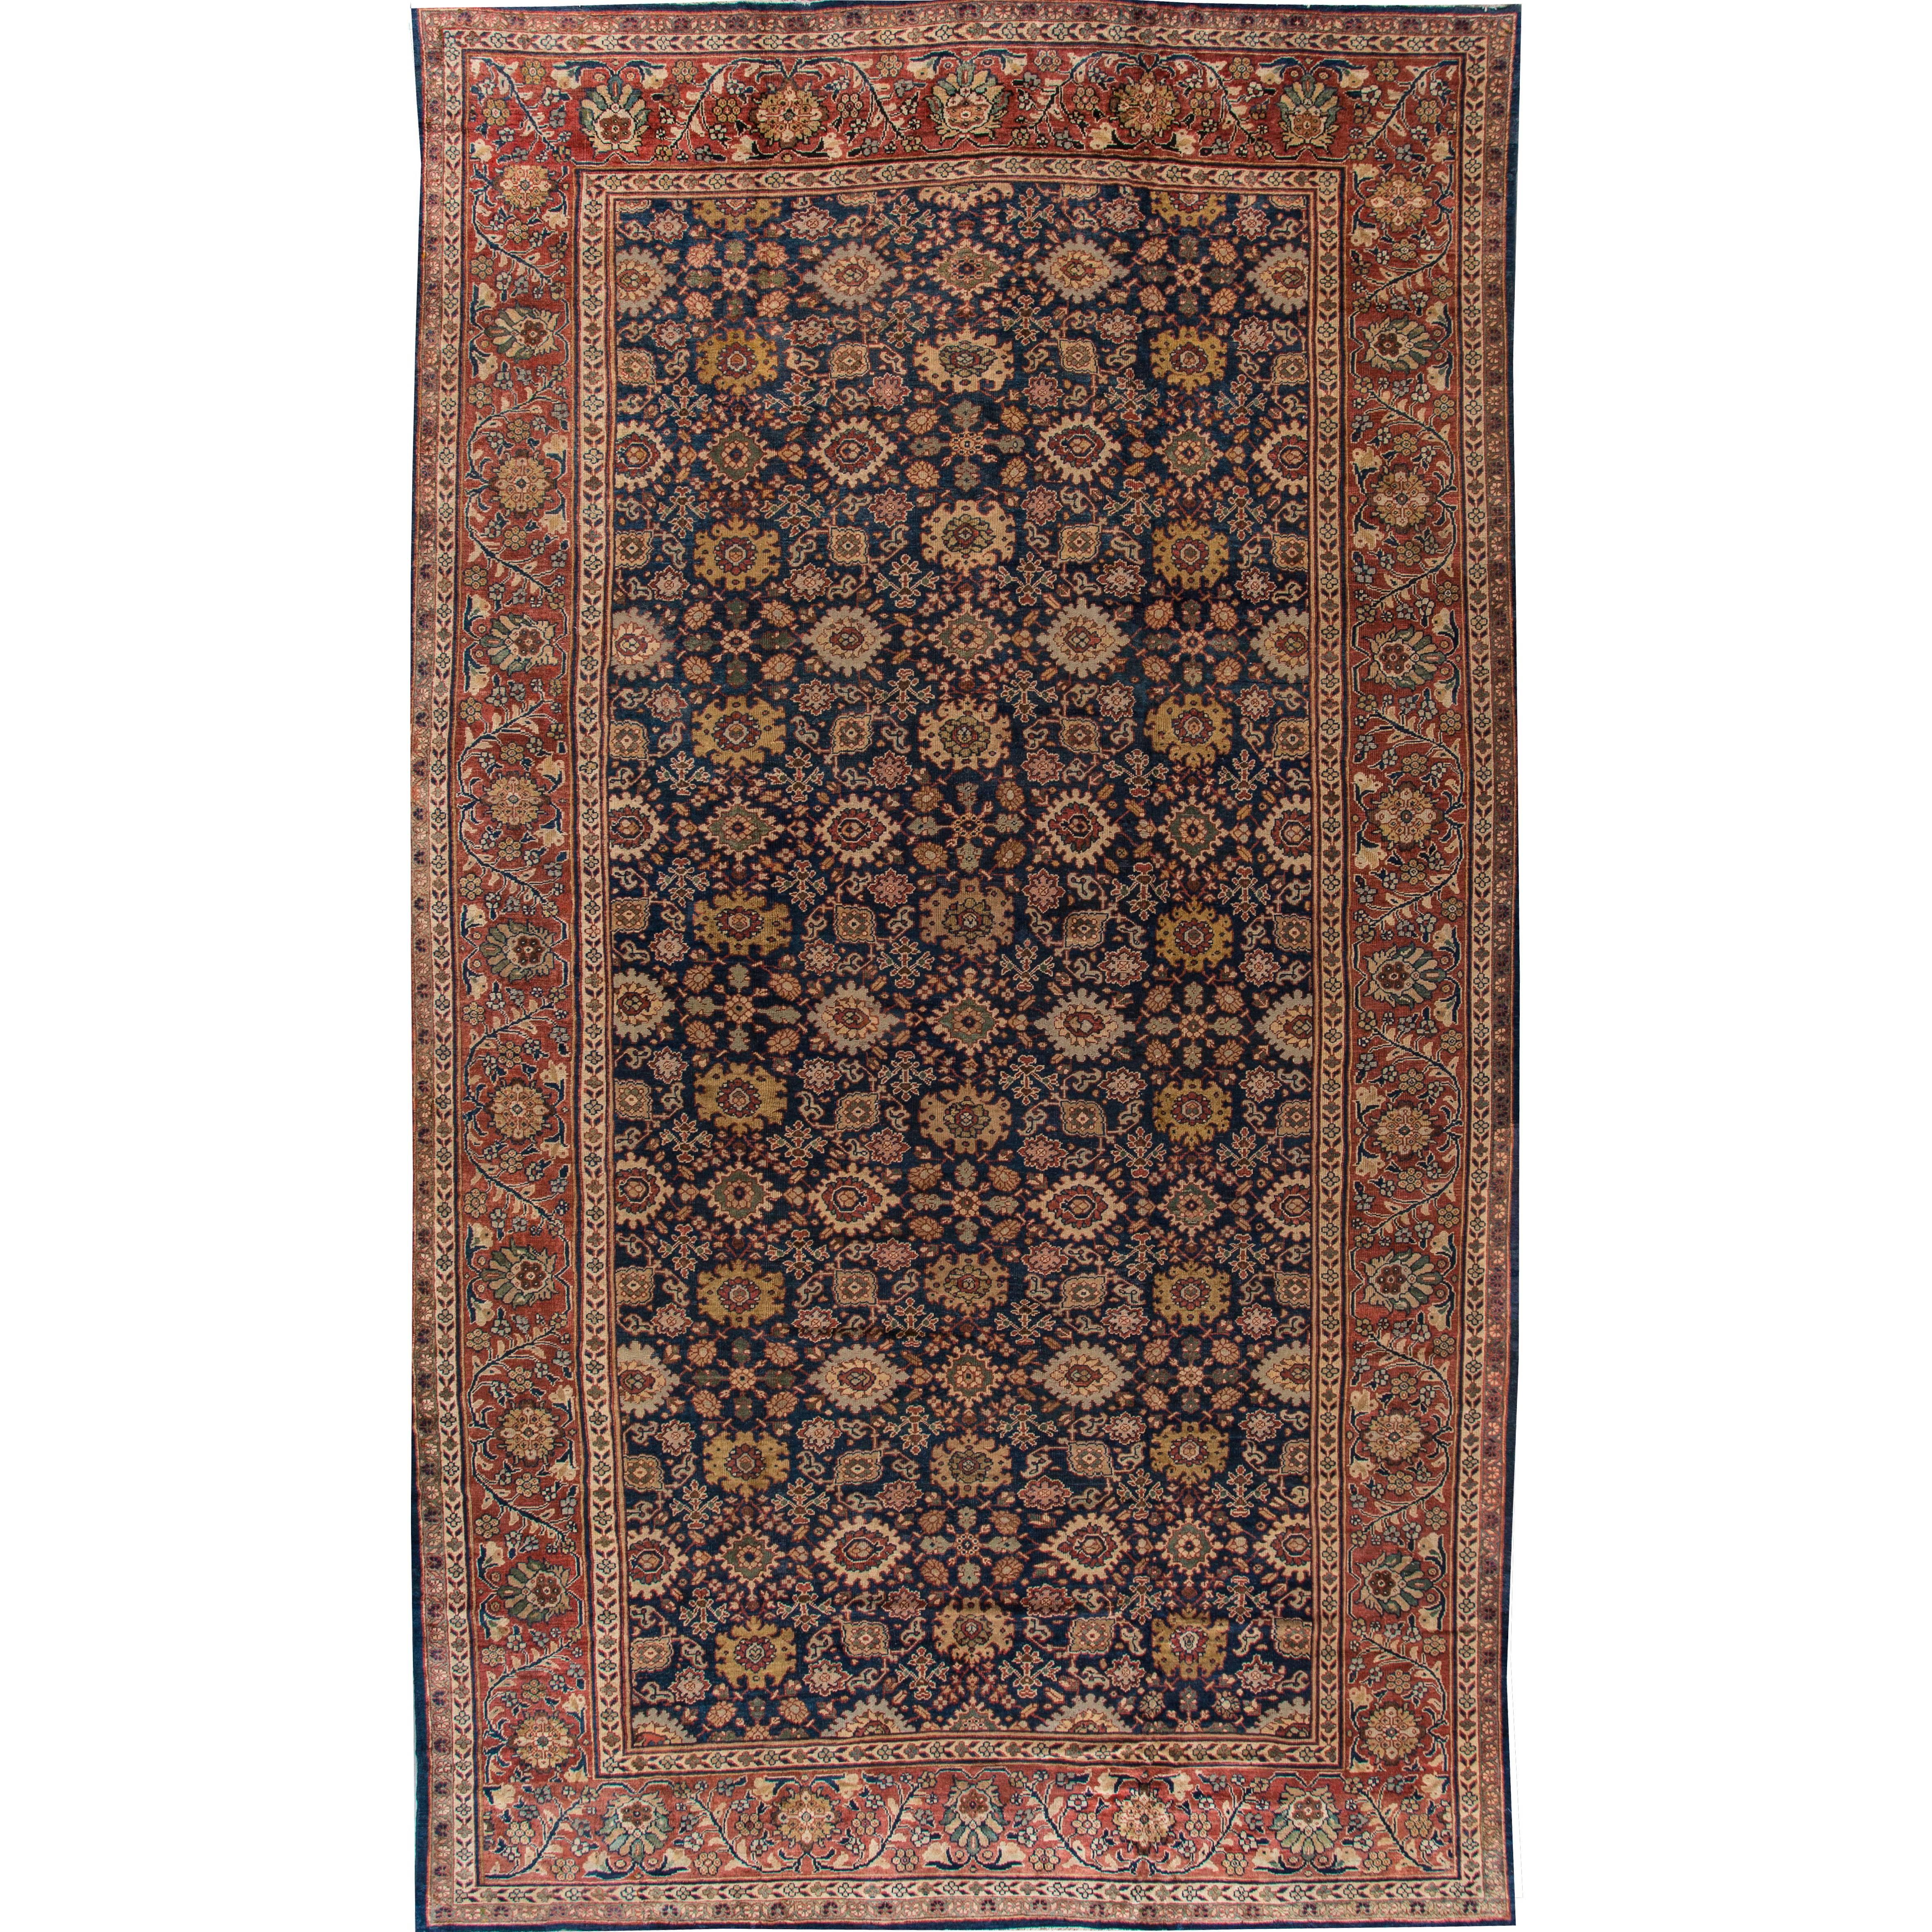 Simply Beautiful Antique Sultanabad Rug For Sale